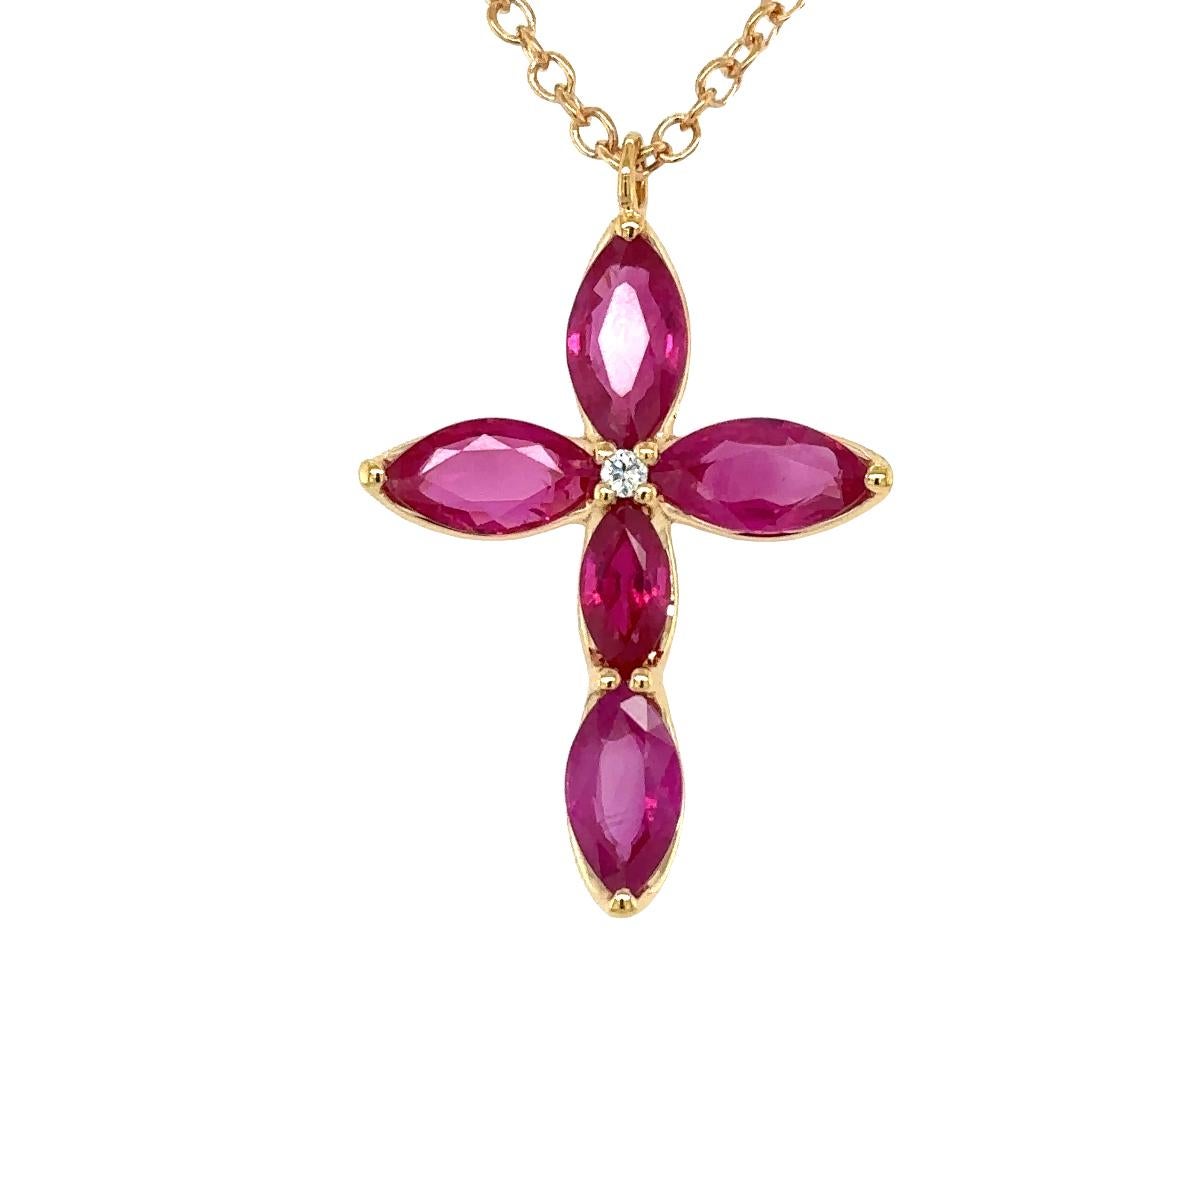 	TIMELESS Necklace Cross in rose gold 18Kt 6.70 gr with 5 Marquise Red Rubies in total 3.95 ct and diamonds G color VS clarity in total 0.03 ct

The Timeless Collection was inspired by the endless elegance and sophistication of classic high-jewelry,